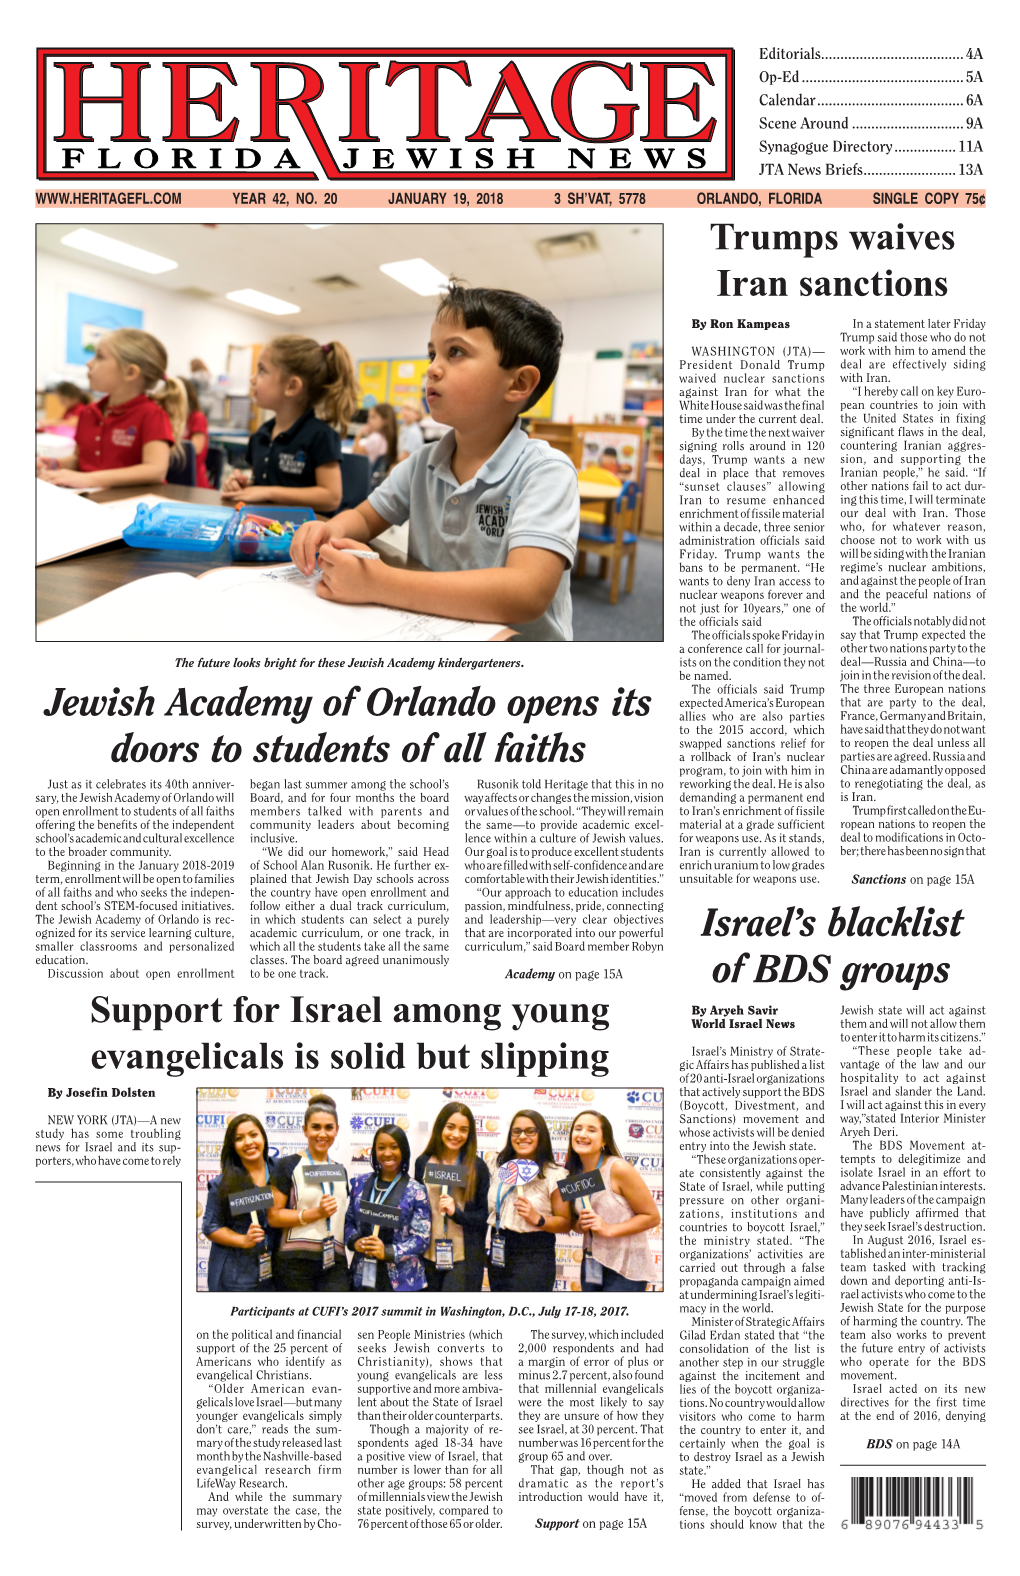 Jewish Academy of Orlando Opens Its Doors to Students of All Faiths